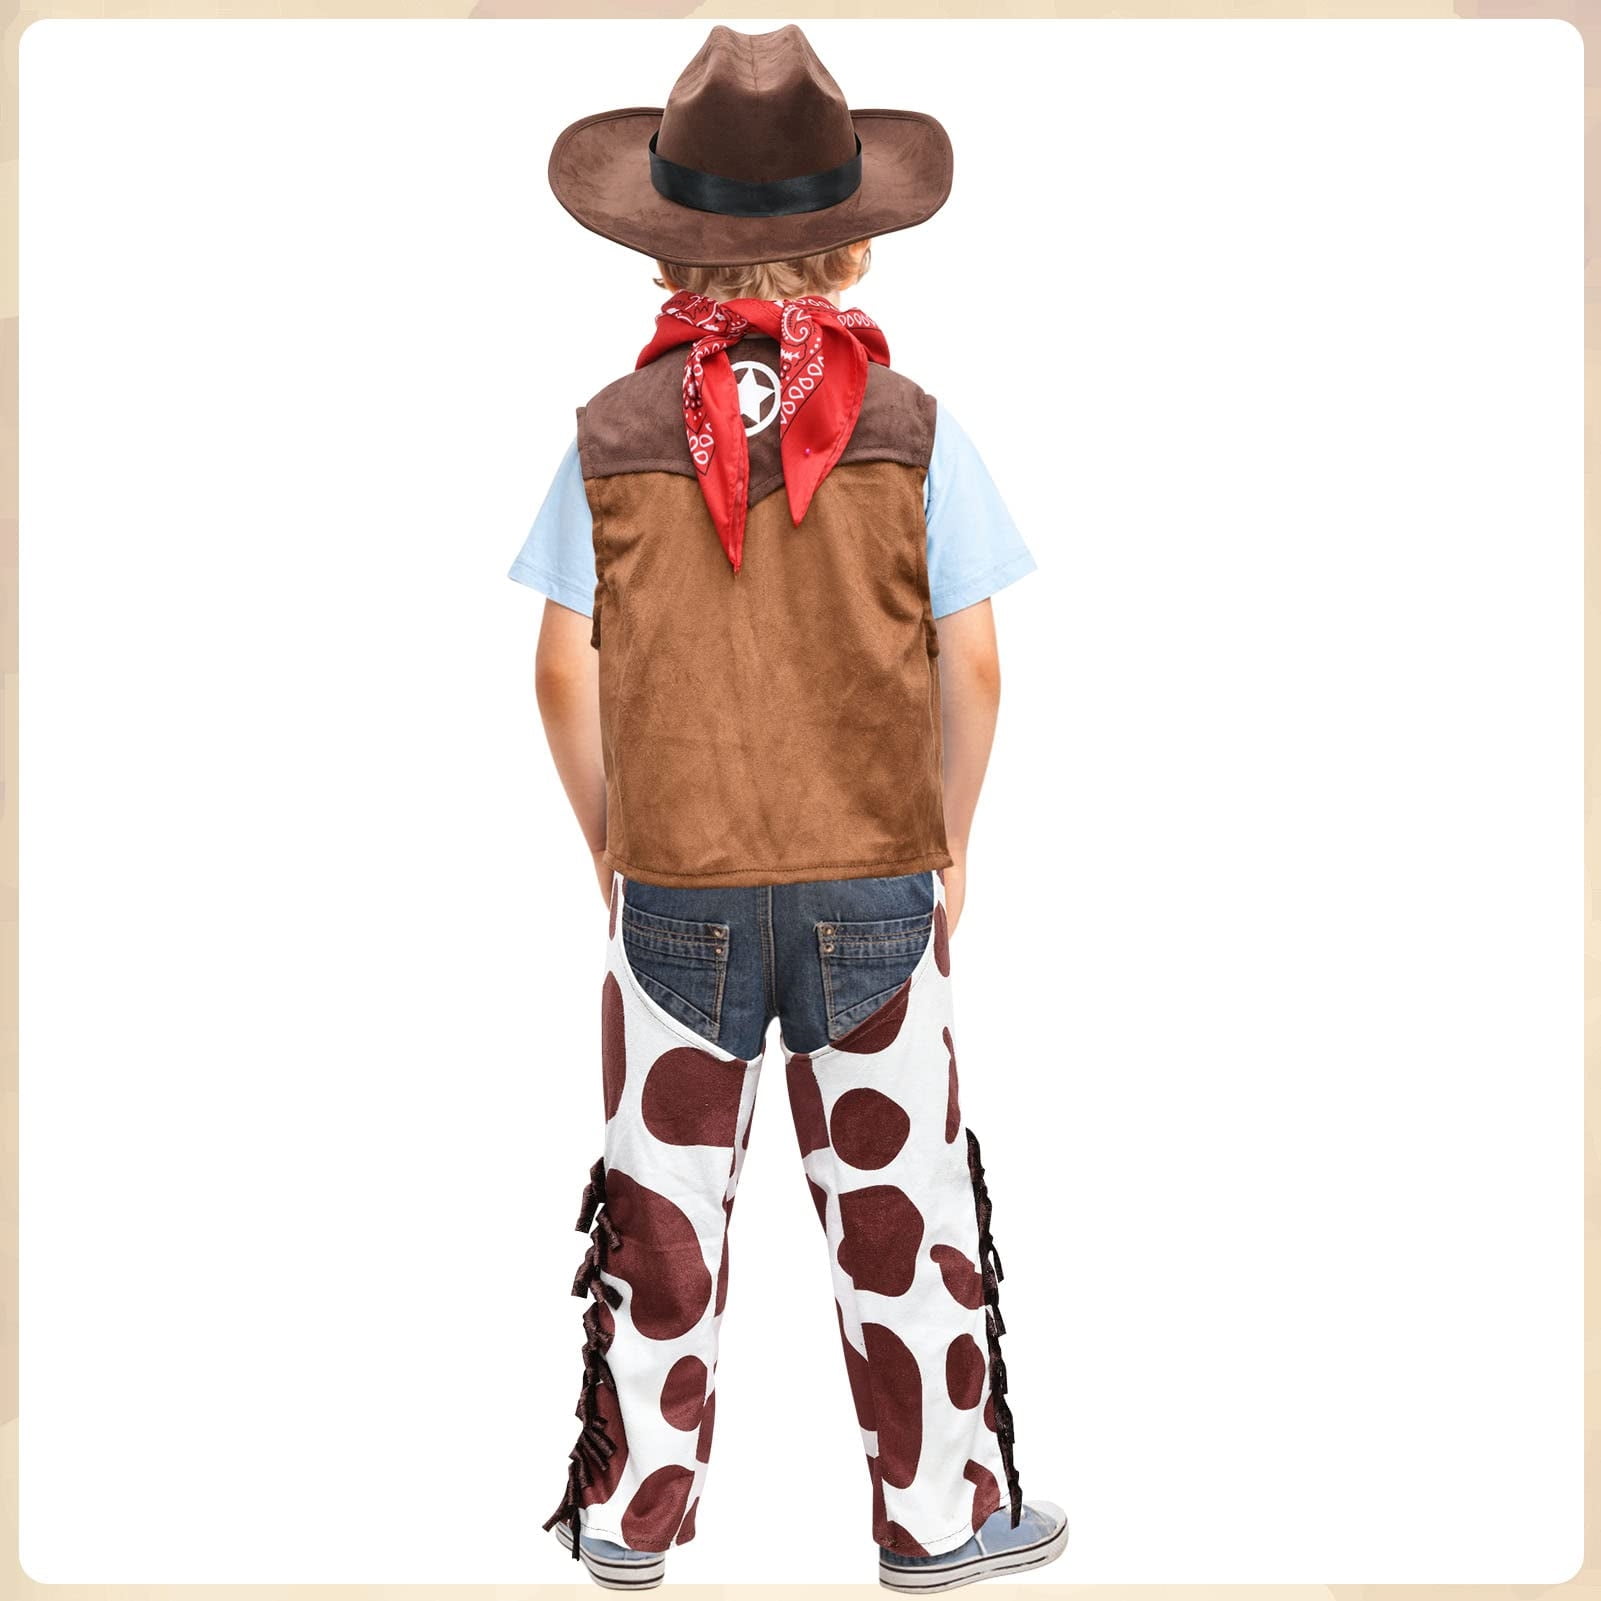 Buy Spooktacular Creations Cowboy Costume Deluxe Set for Kids Halloween  Party Dress Up,Role Play and Cosplay (S(5-7yr)) Brown Online at Low Prices  in India 